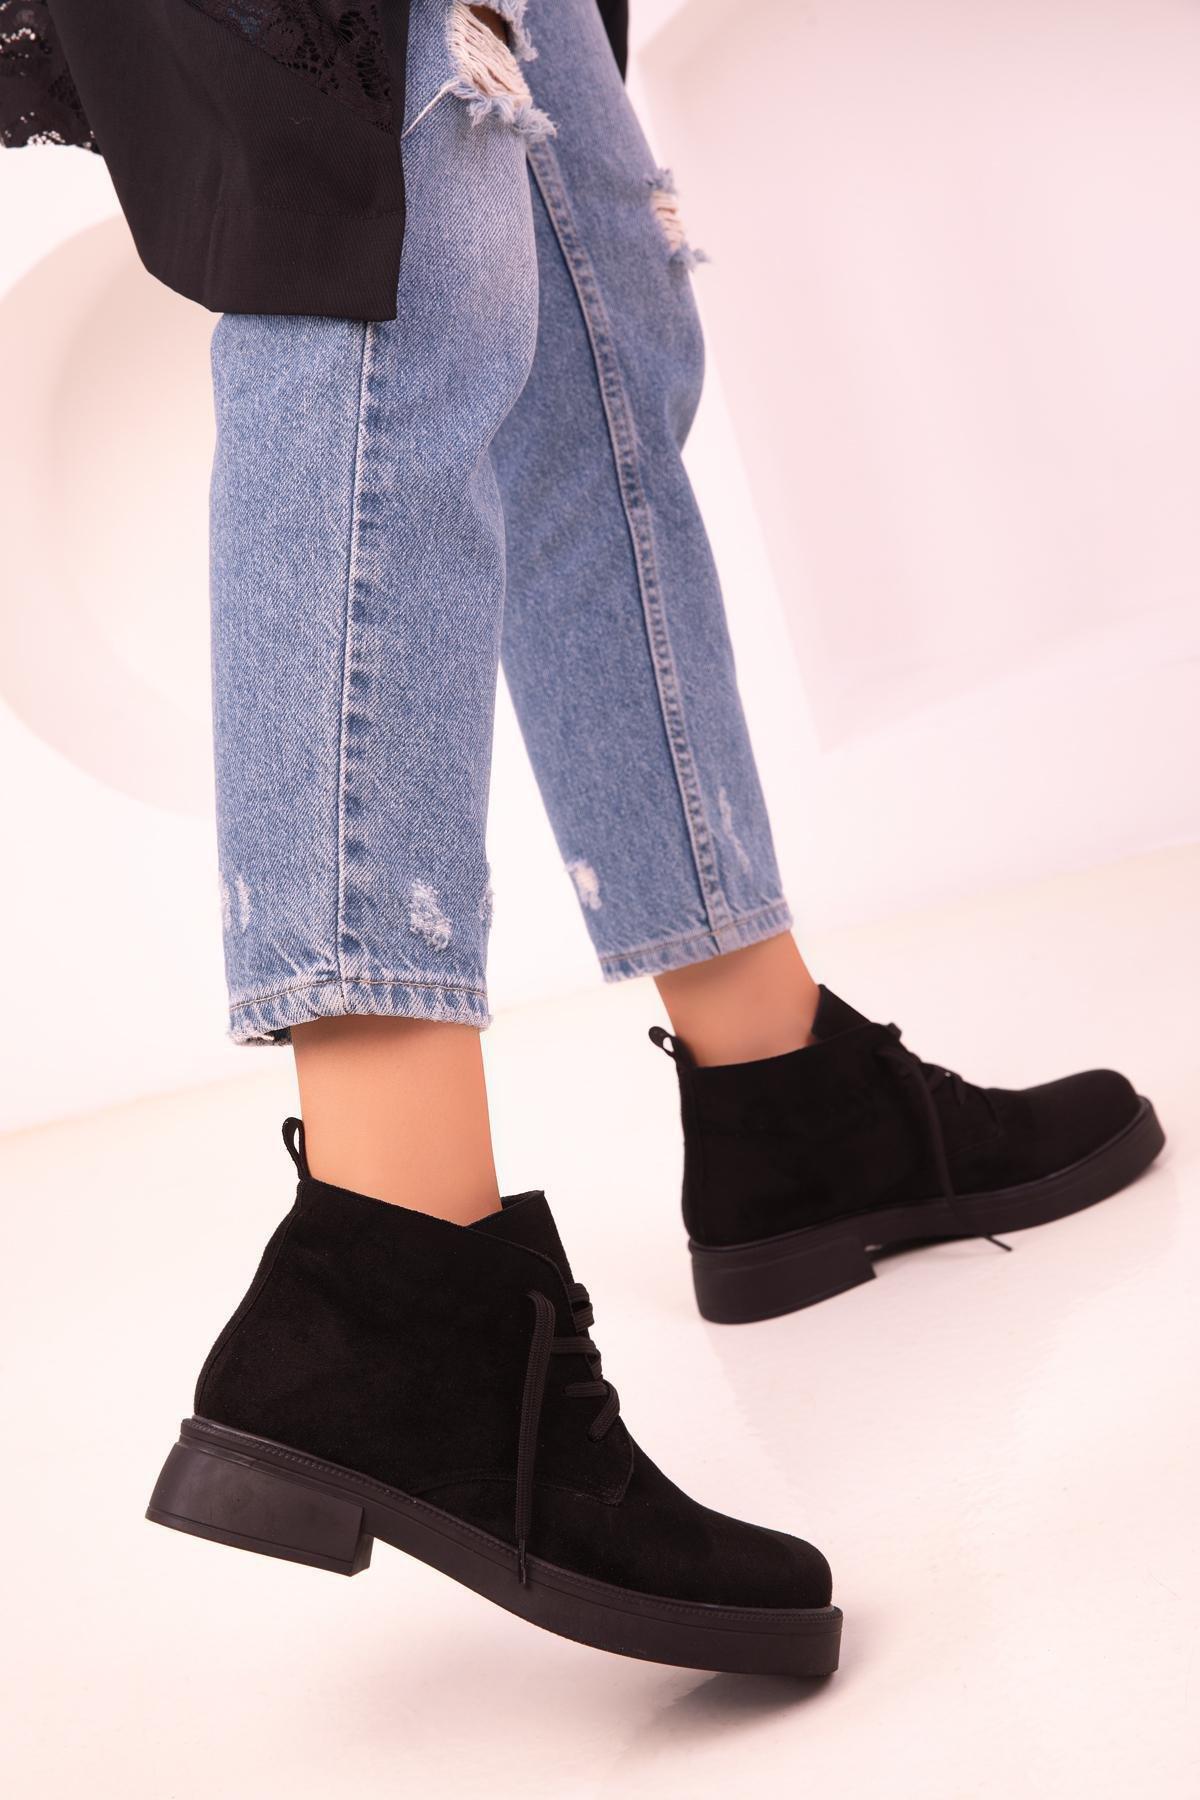 SOHO - Black Casual Suede Boots